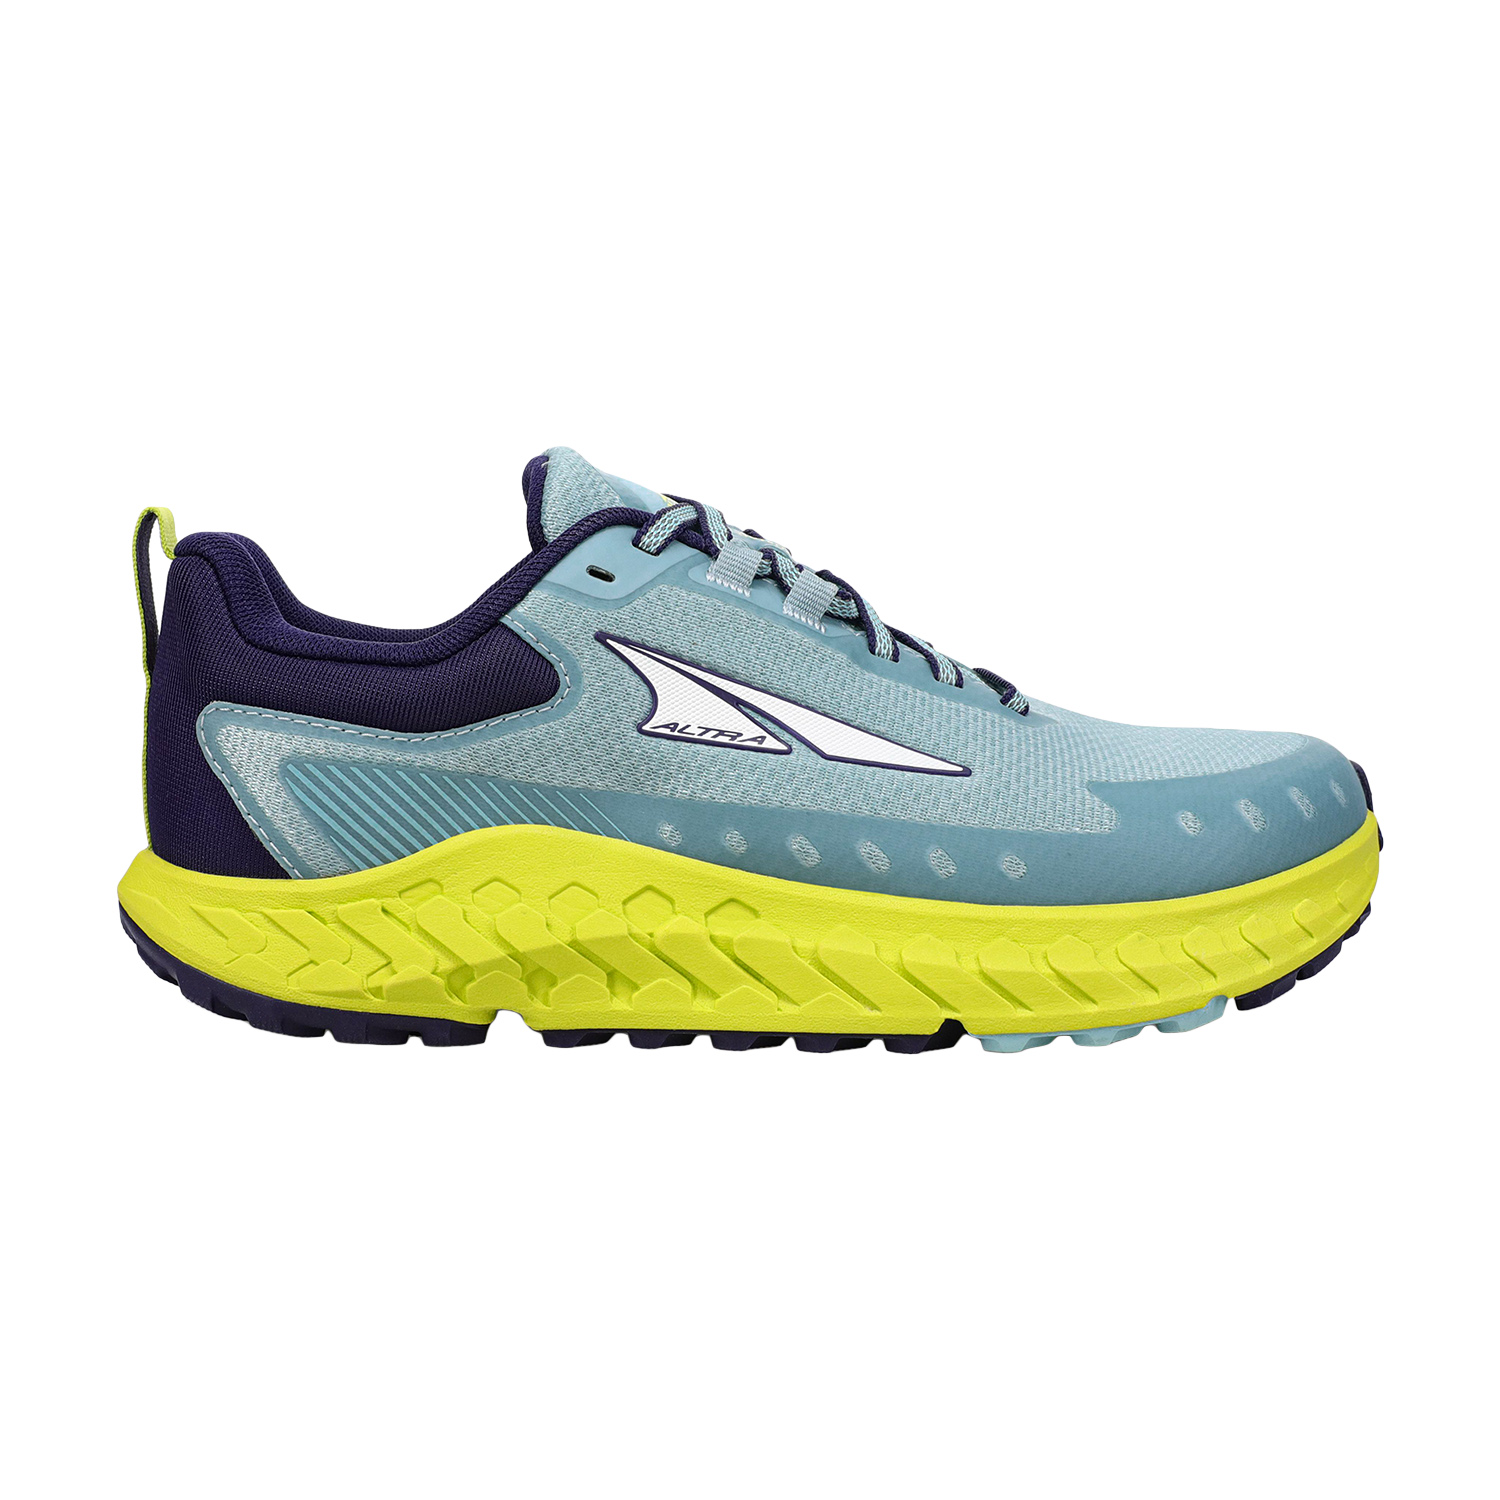 Altra Outroad 2 Women's Trail Running Shoes - Blue/Green